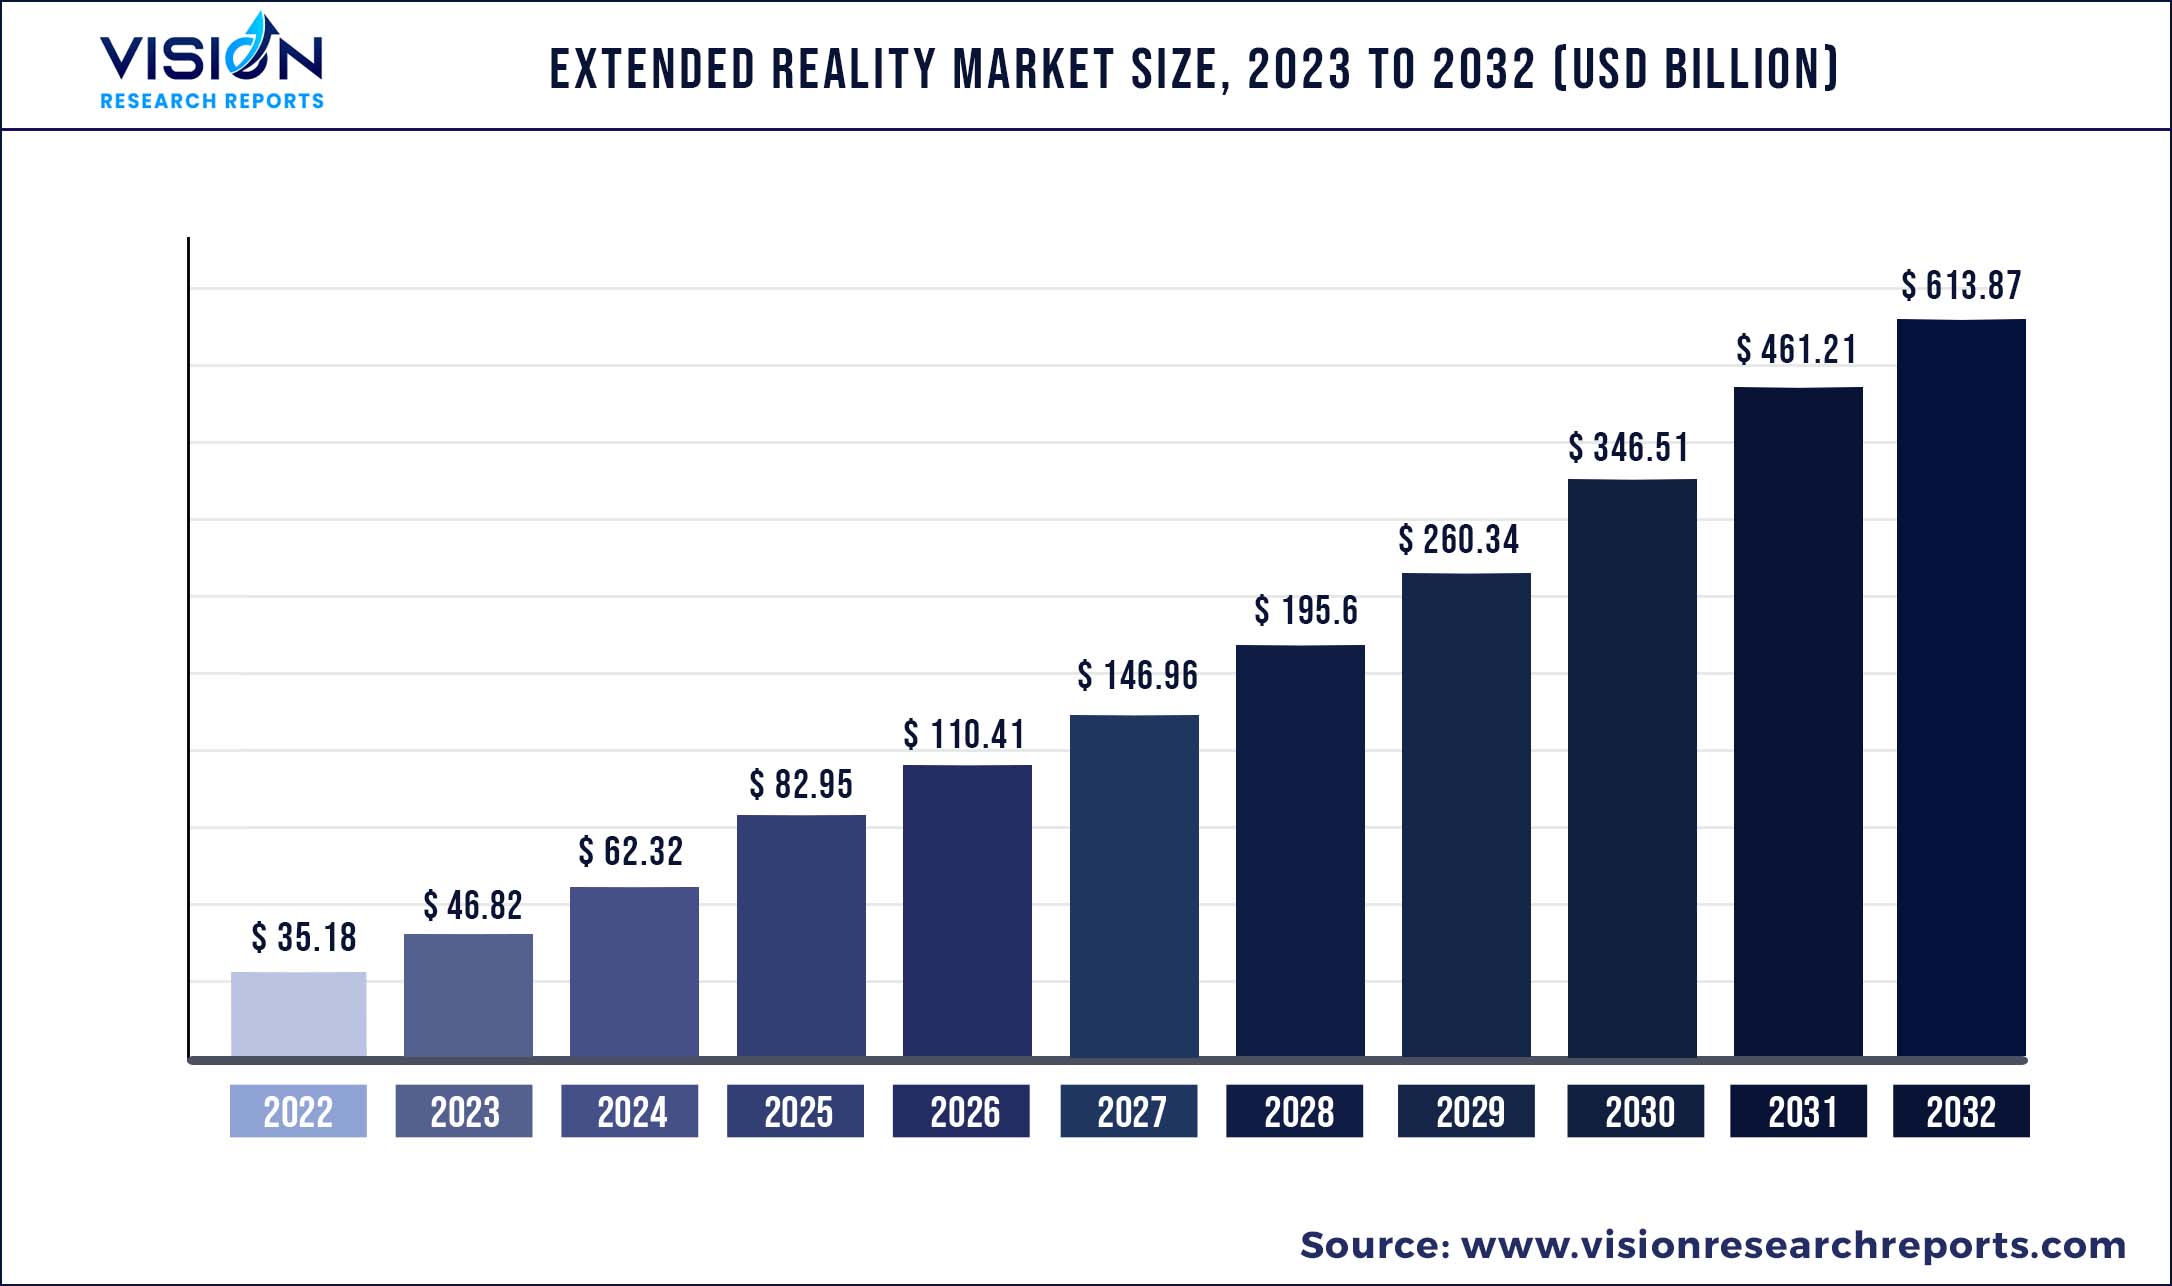 Extended Reality Market Size 2023 to 2032